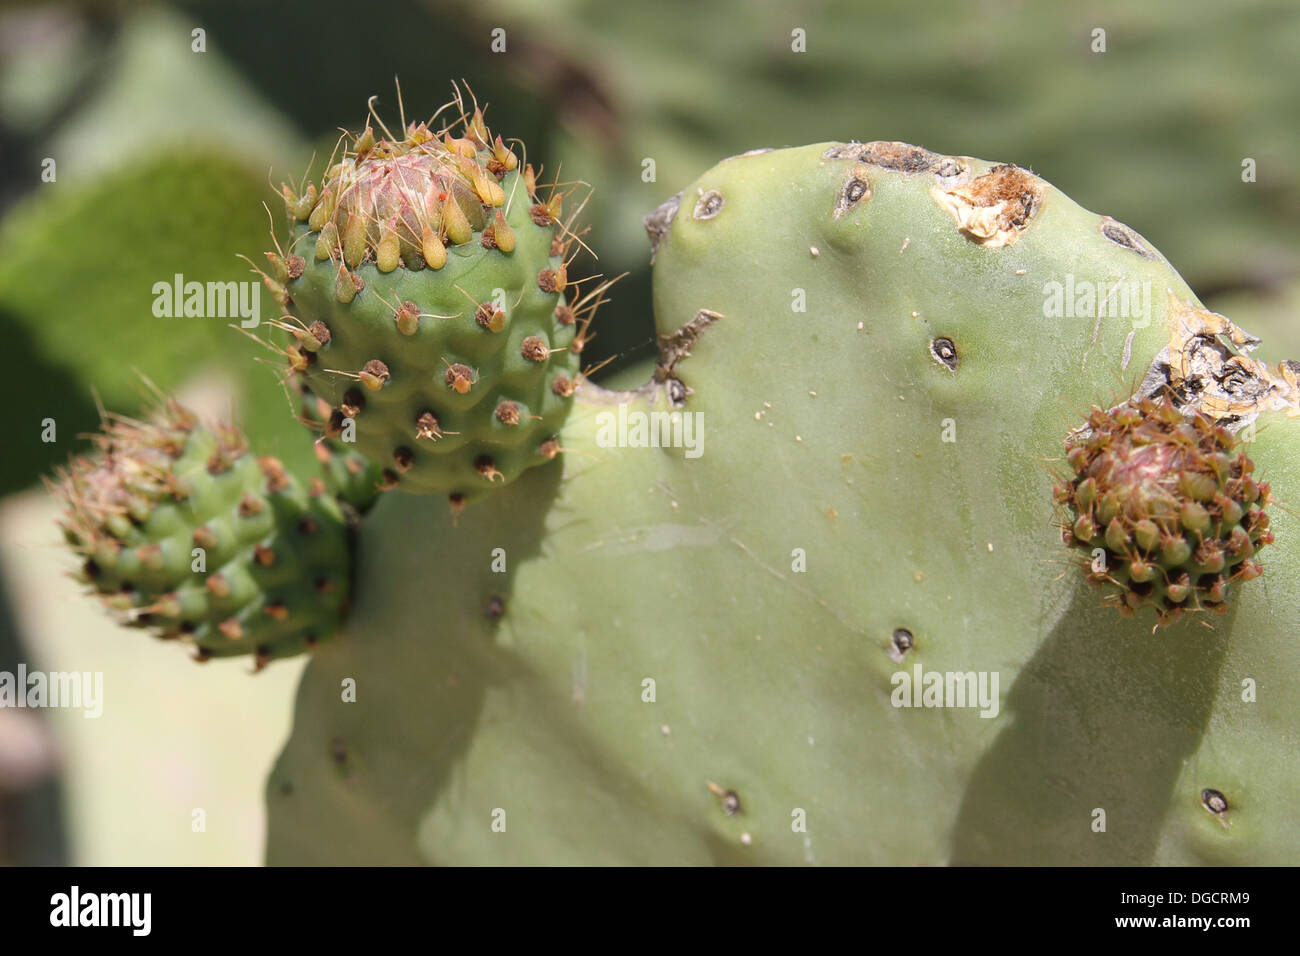 Prickly pears cactus found on the island of Sicily. (cactus opuntia) Stock Photo